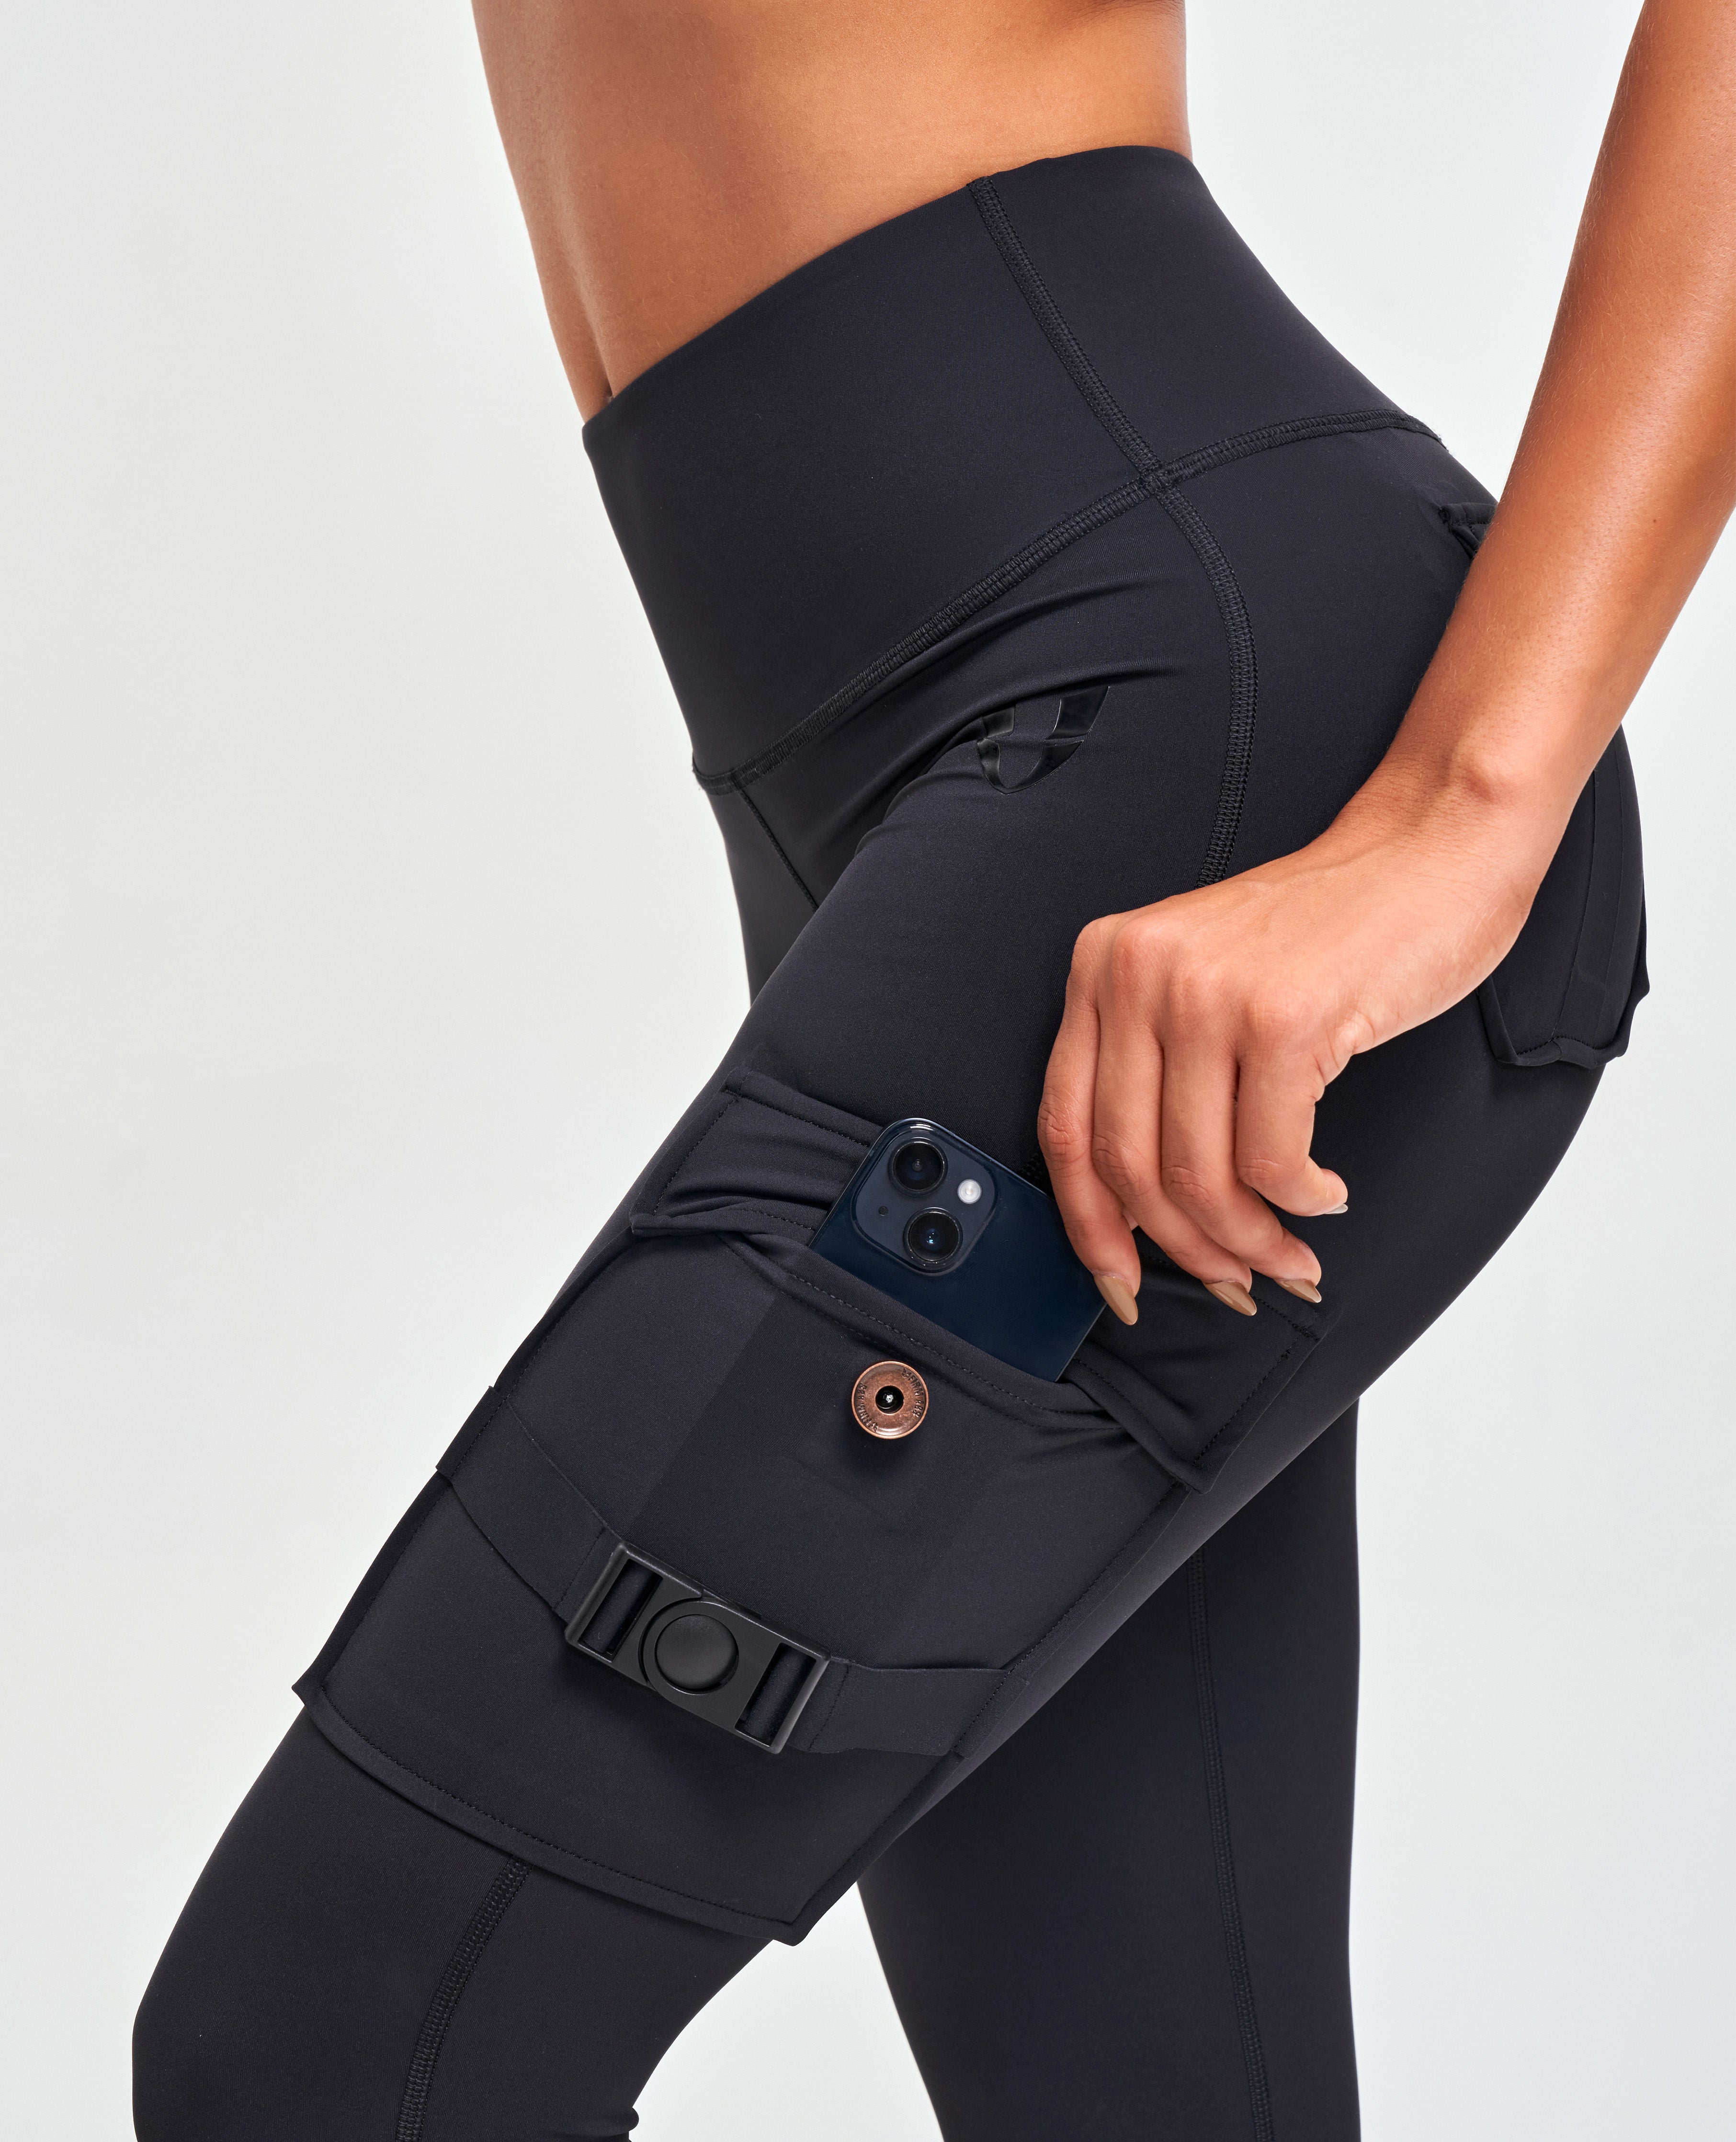 Work Leggings With Pockets  International Society of Precision